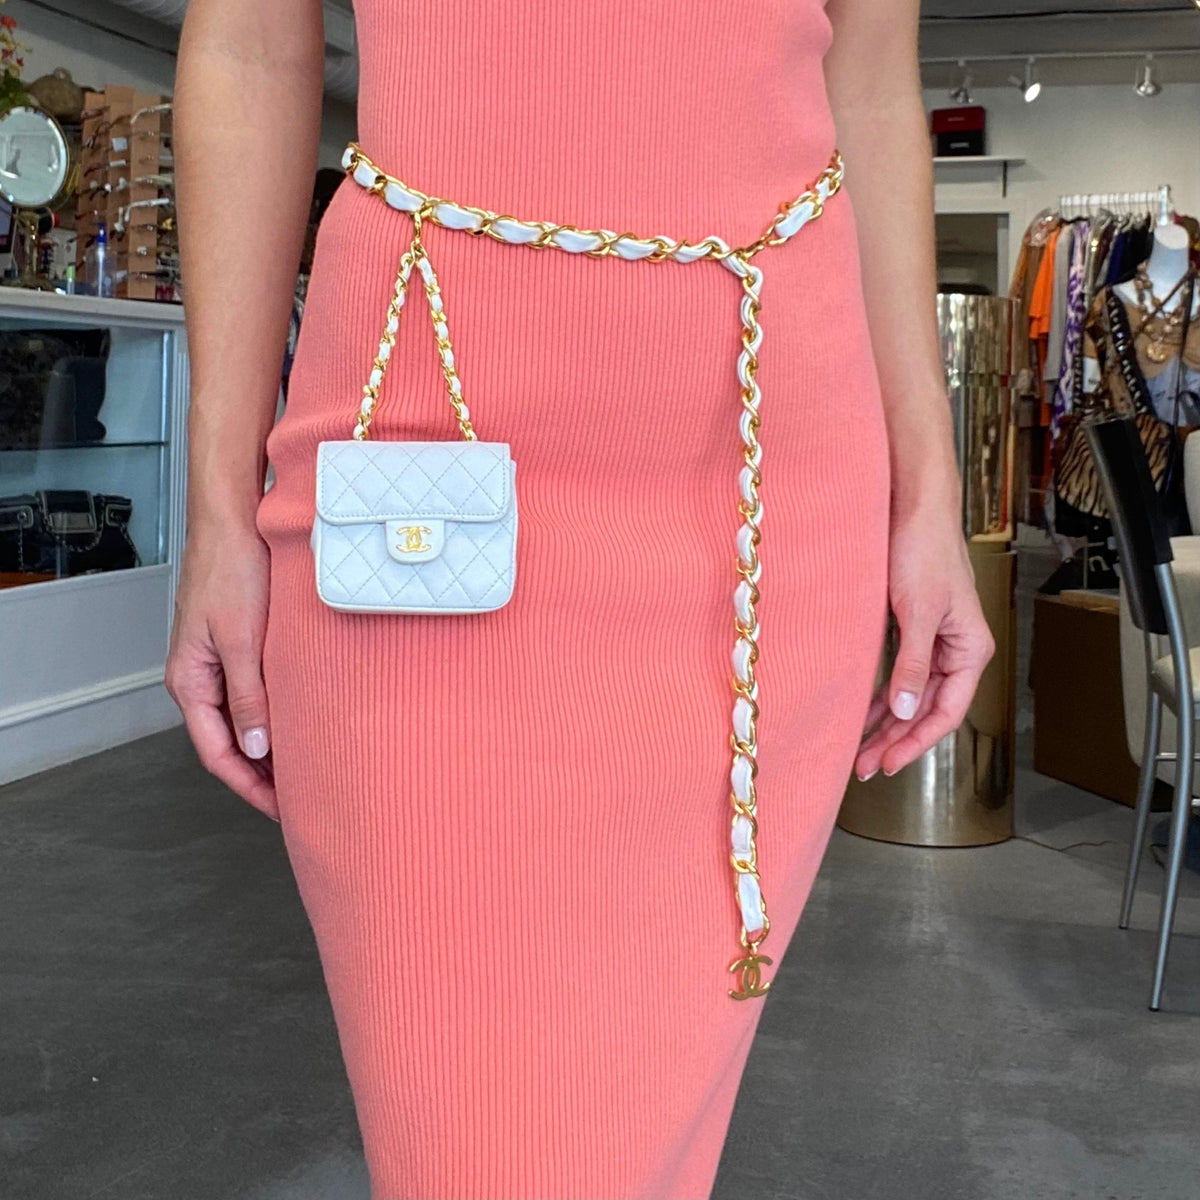 Chanel White Micro Belt Bag – Dina C's Fab and Funky Consignment Boutique